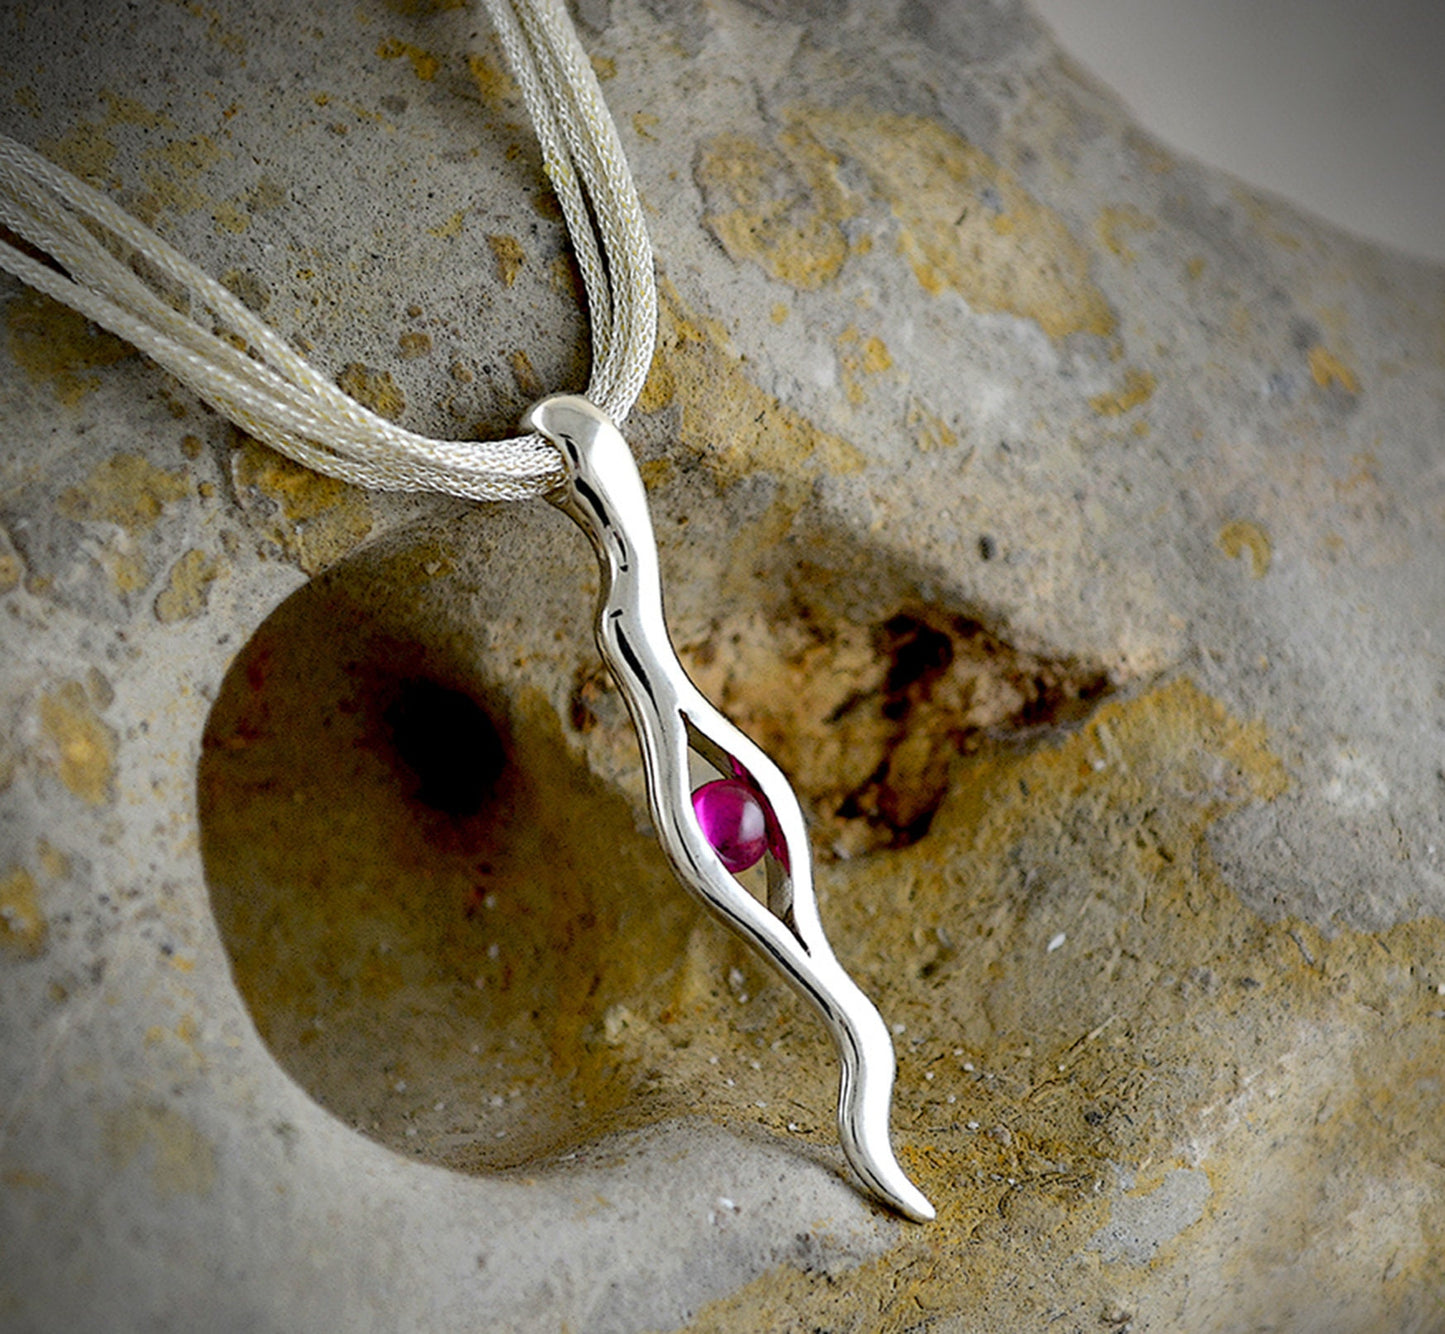 Earrings and eye pendant set, handmade in solid silver and set with a top quality synthetic stone or natural stones